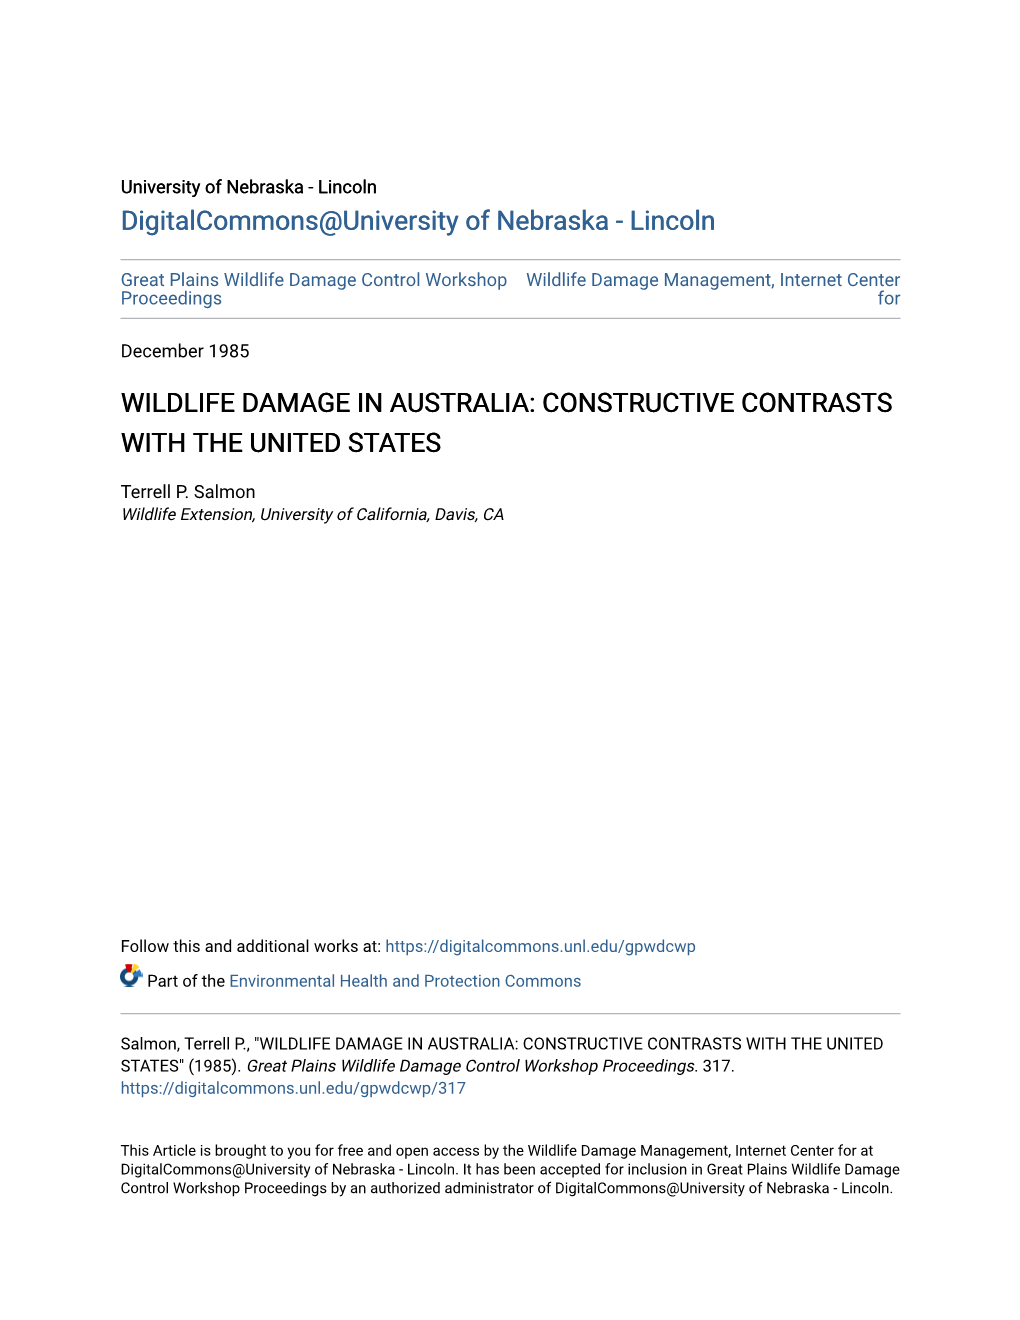 Wildlife Damage in Australia: Constructive Contrasts with the United States